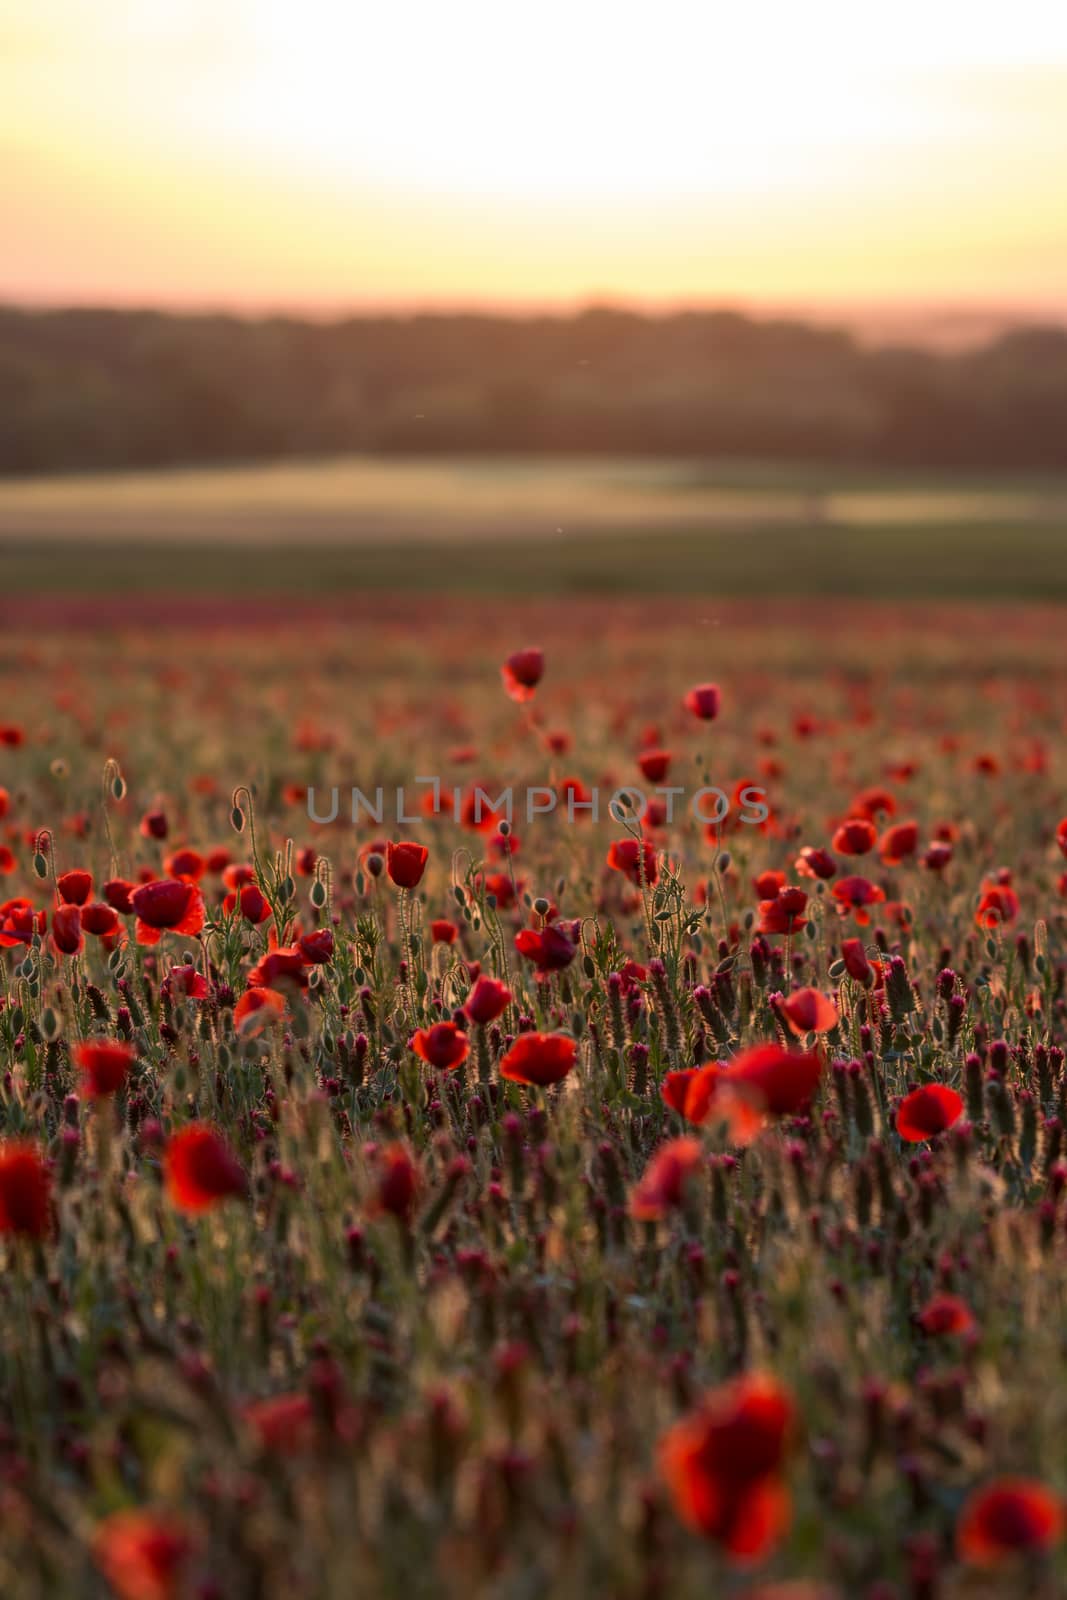 Landscape with poppies by Digoarpi